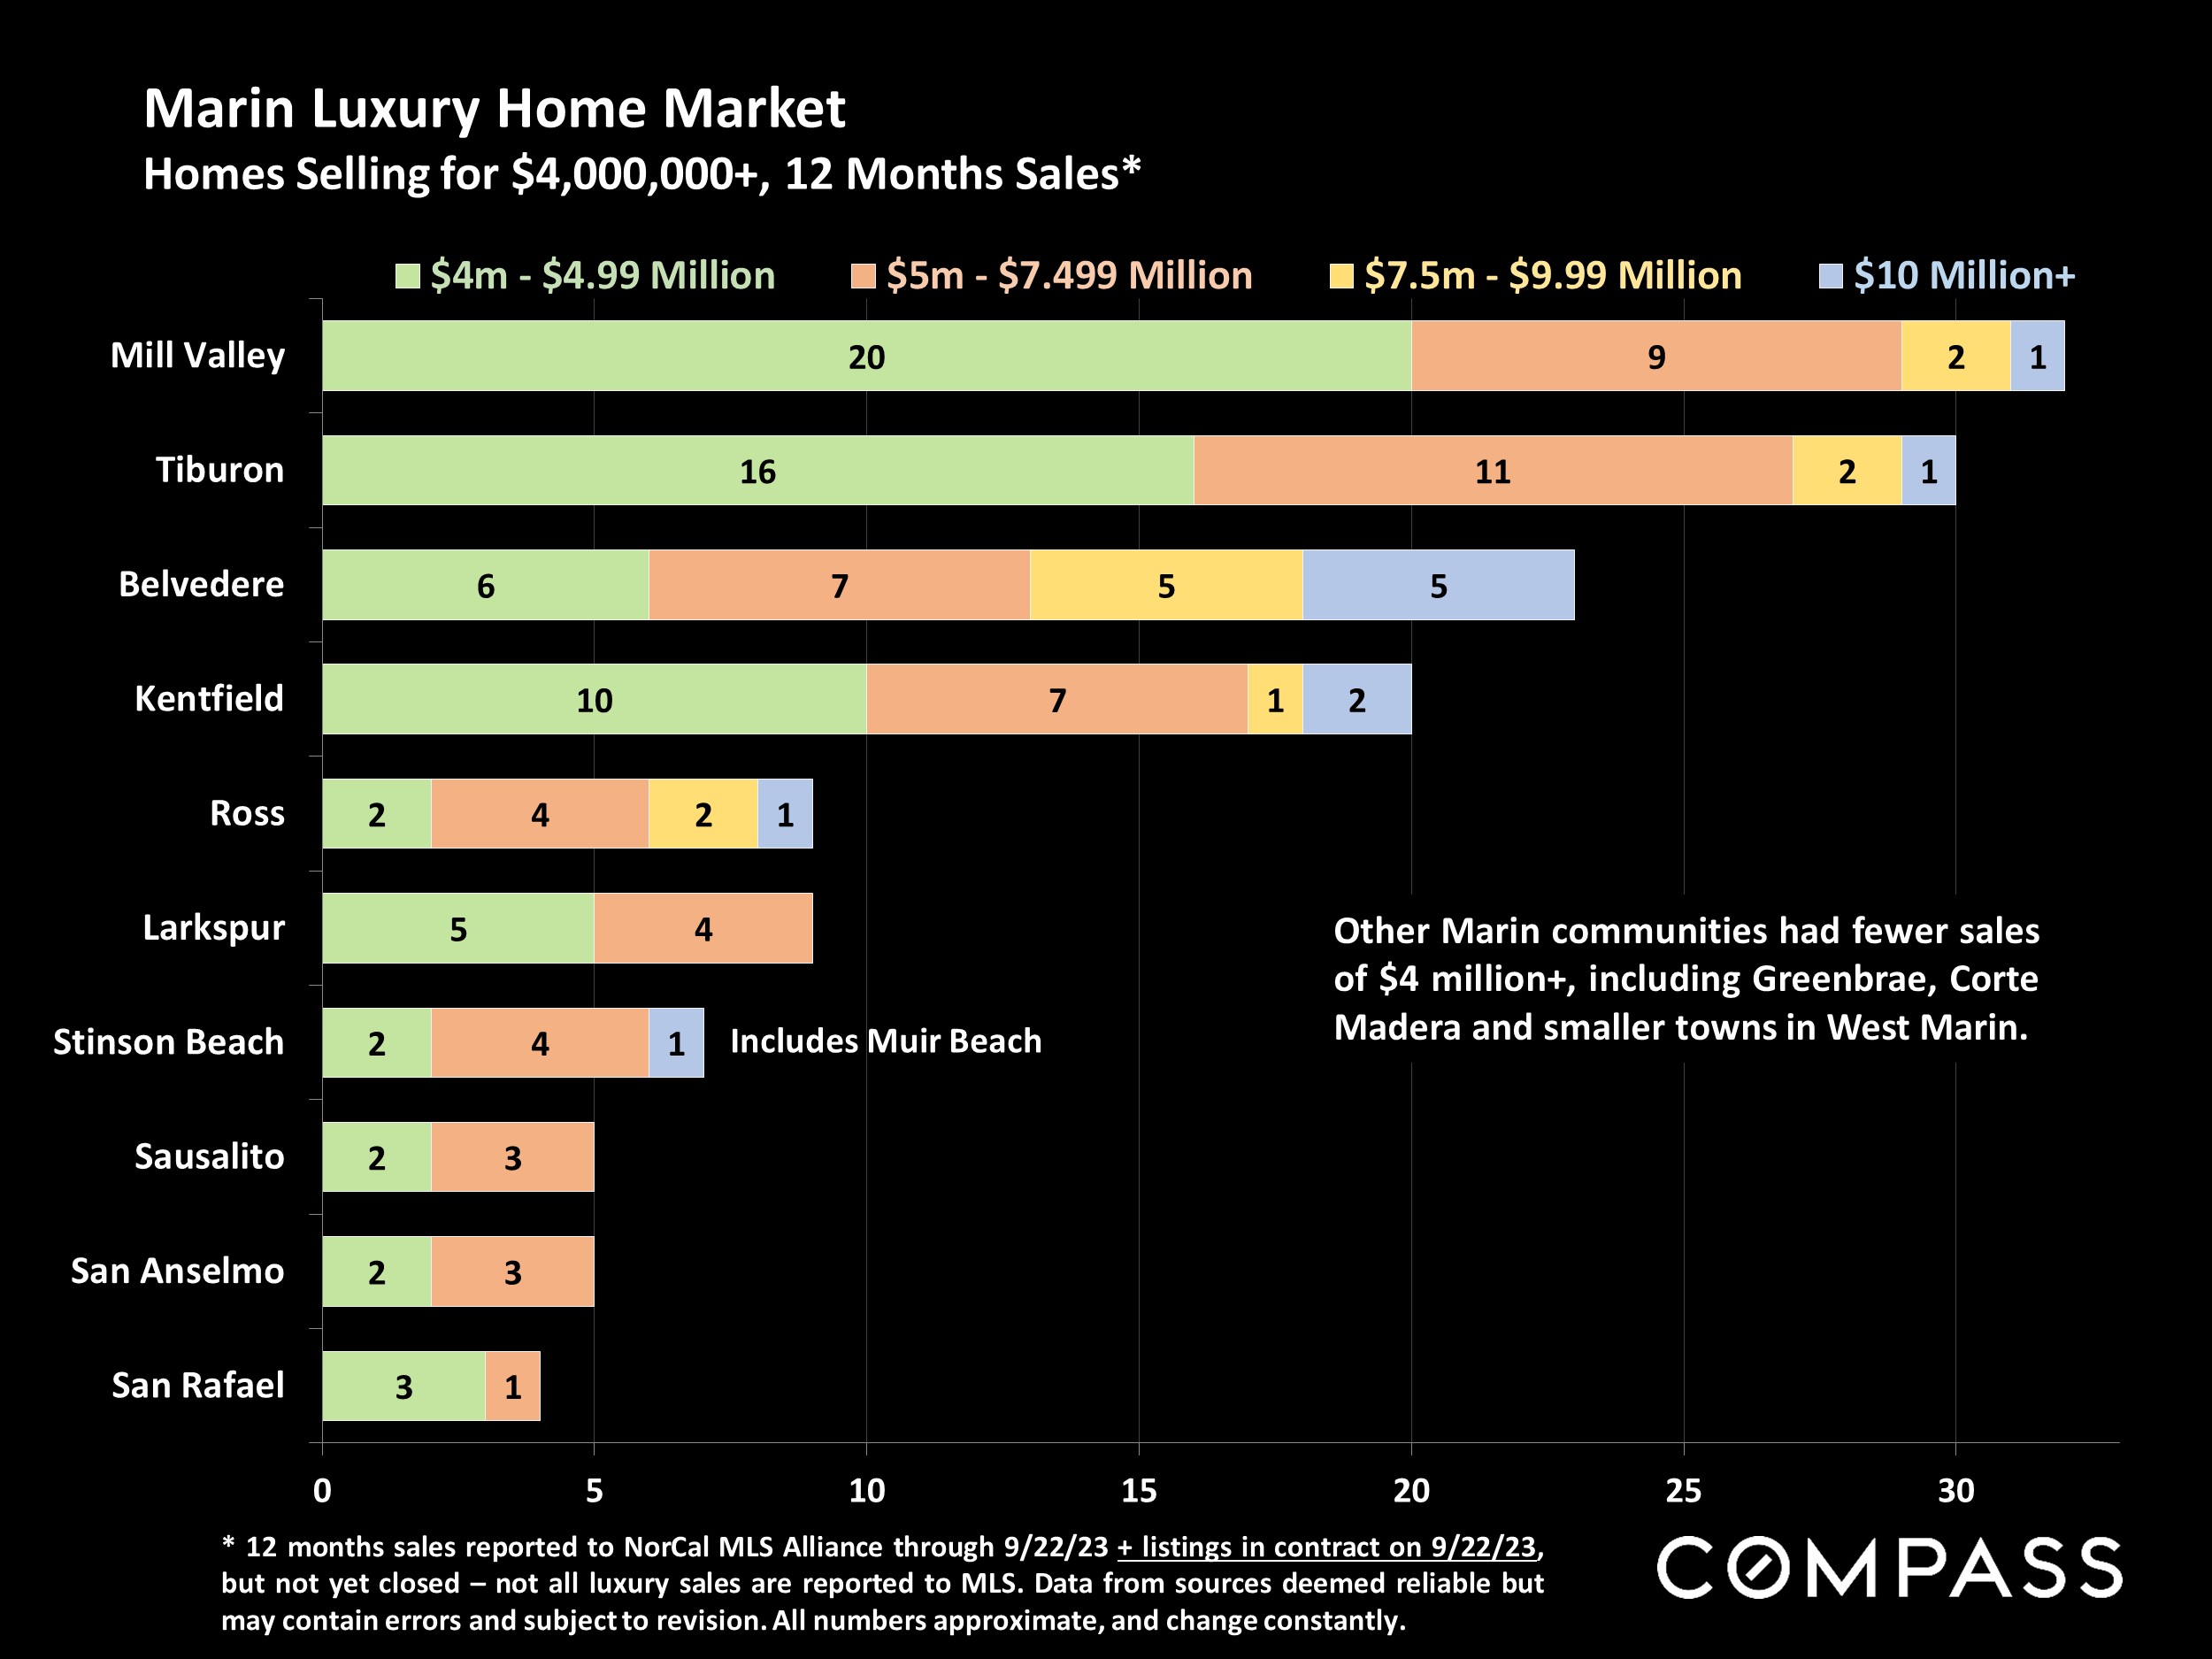 Marin Luxury Home Market Homes Selling for $4,000,000+, 12 Months Sales*